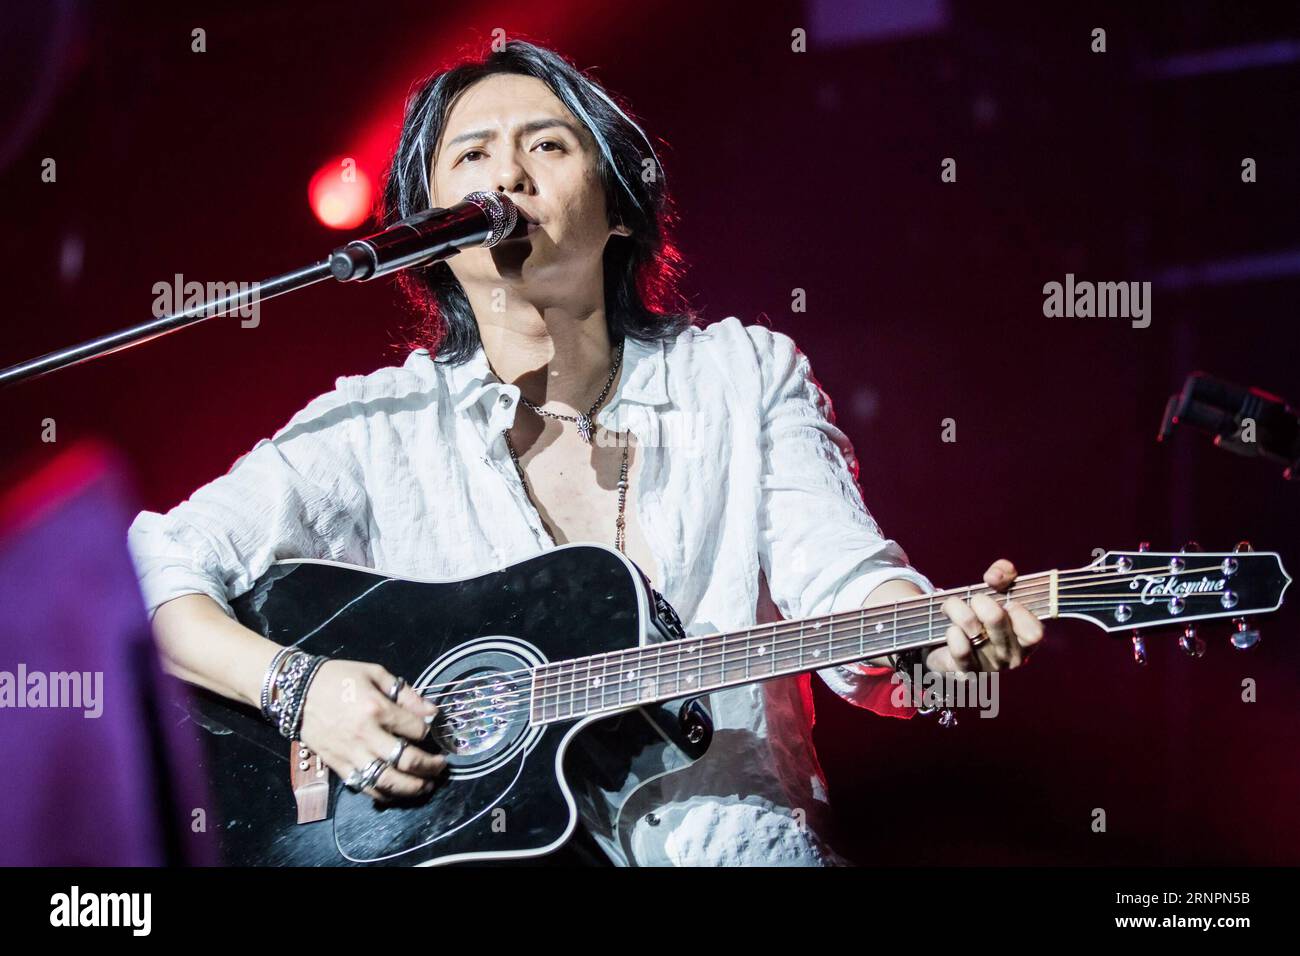 (170903) -- BEIJING, Sept. 3, 2017 -- Zhang Qi, leading singer of Chinese Rock n Roll band Black Panther, performs during their concert True Color in Beijing, capital of China, Sept. 2, 2017. ) (lfj) CHINA-BEIJING-BLACK PANTHER BAND-CONCERT (CN) YanxMin PUBLICATIONxNOTxINxCHN   Beijing Sept 3 2017 Zhang Qi Leading Singer of Chinese Rock n Roll Tie Black Panther performs during their Concert True Color in Beijing Capital of China Sept 2 2017 lfj China Beijing Black Panther Tie Concert CN  PUBLICATIONxNOTxINxCHN Stock Photo